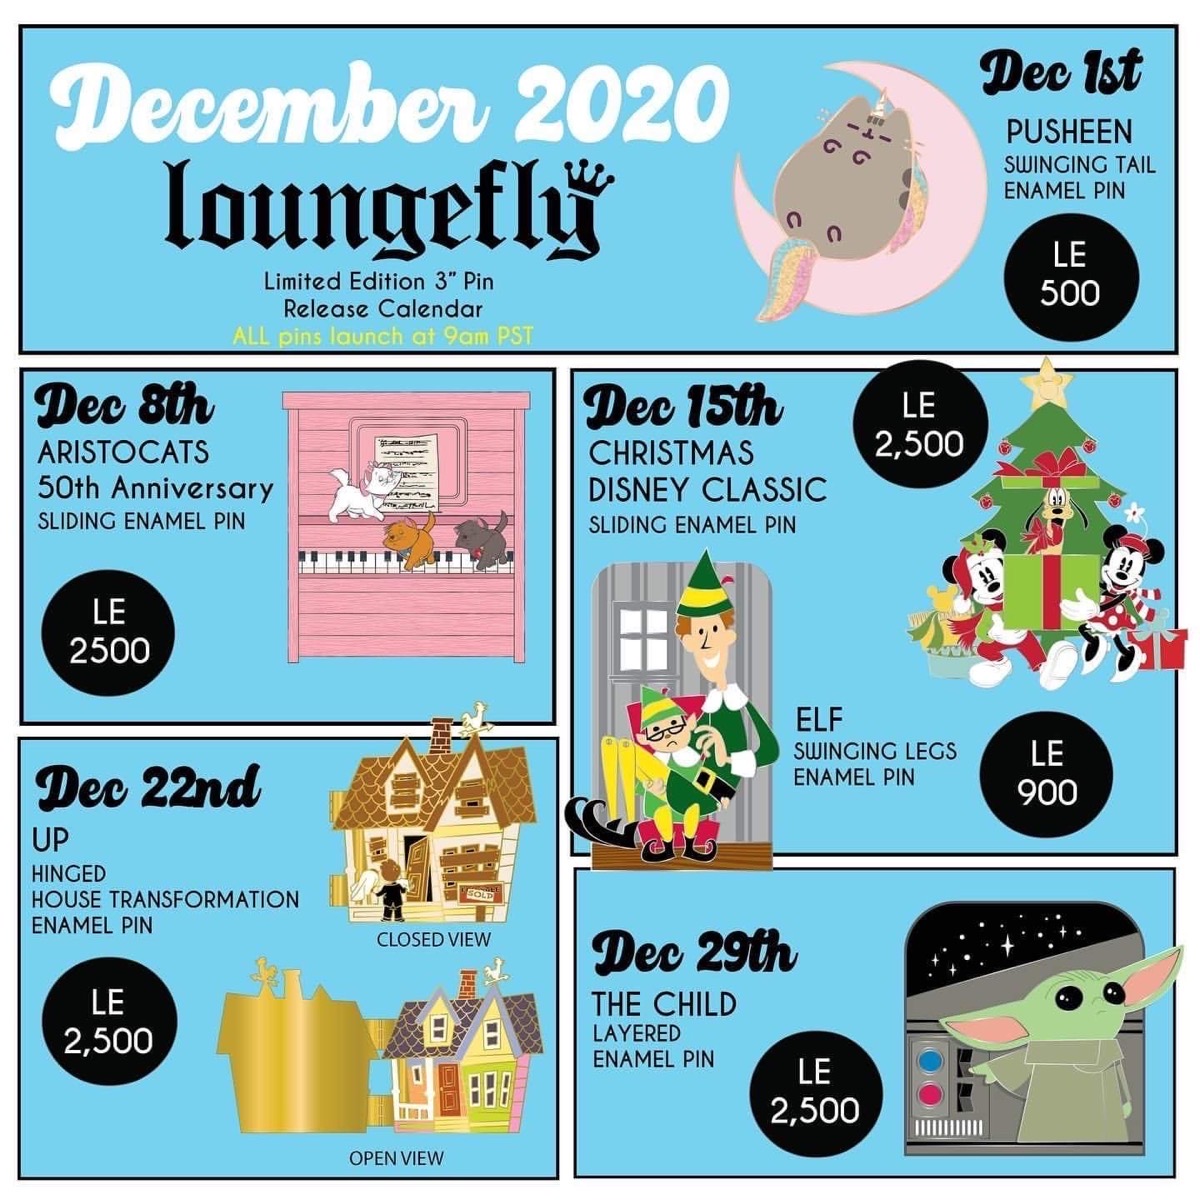 December 2020 Loungefly Disney Pin Preview